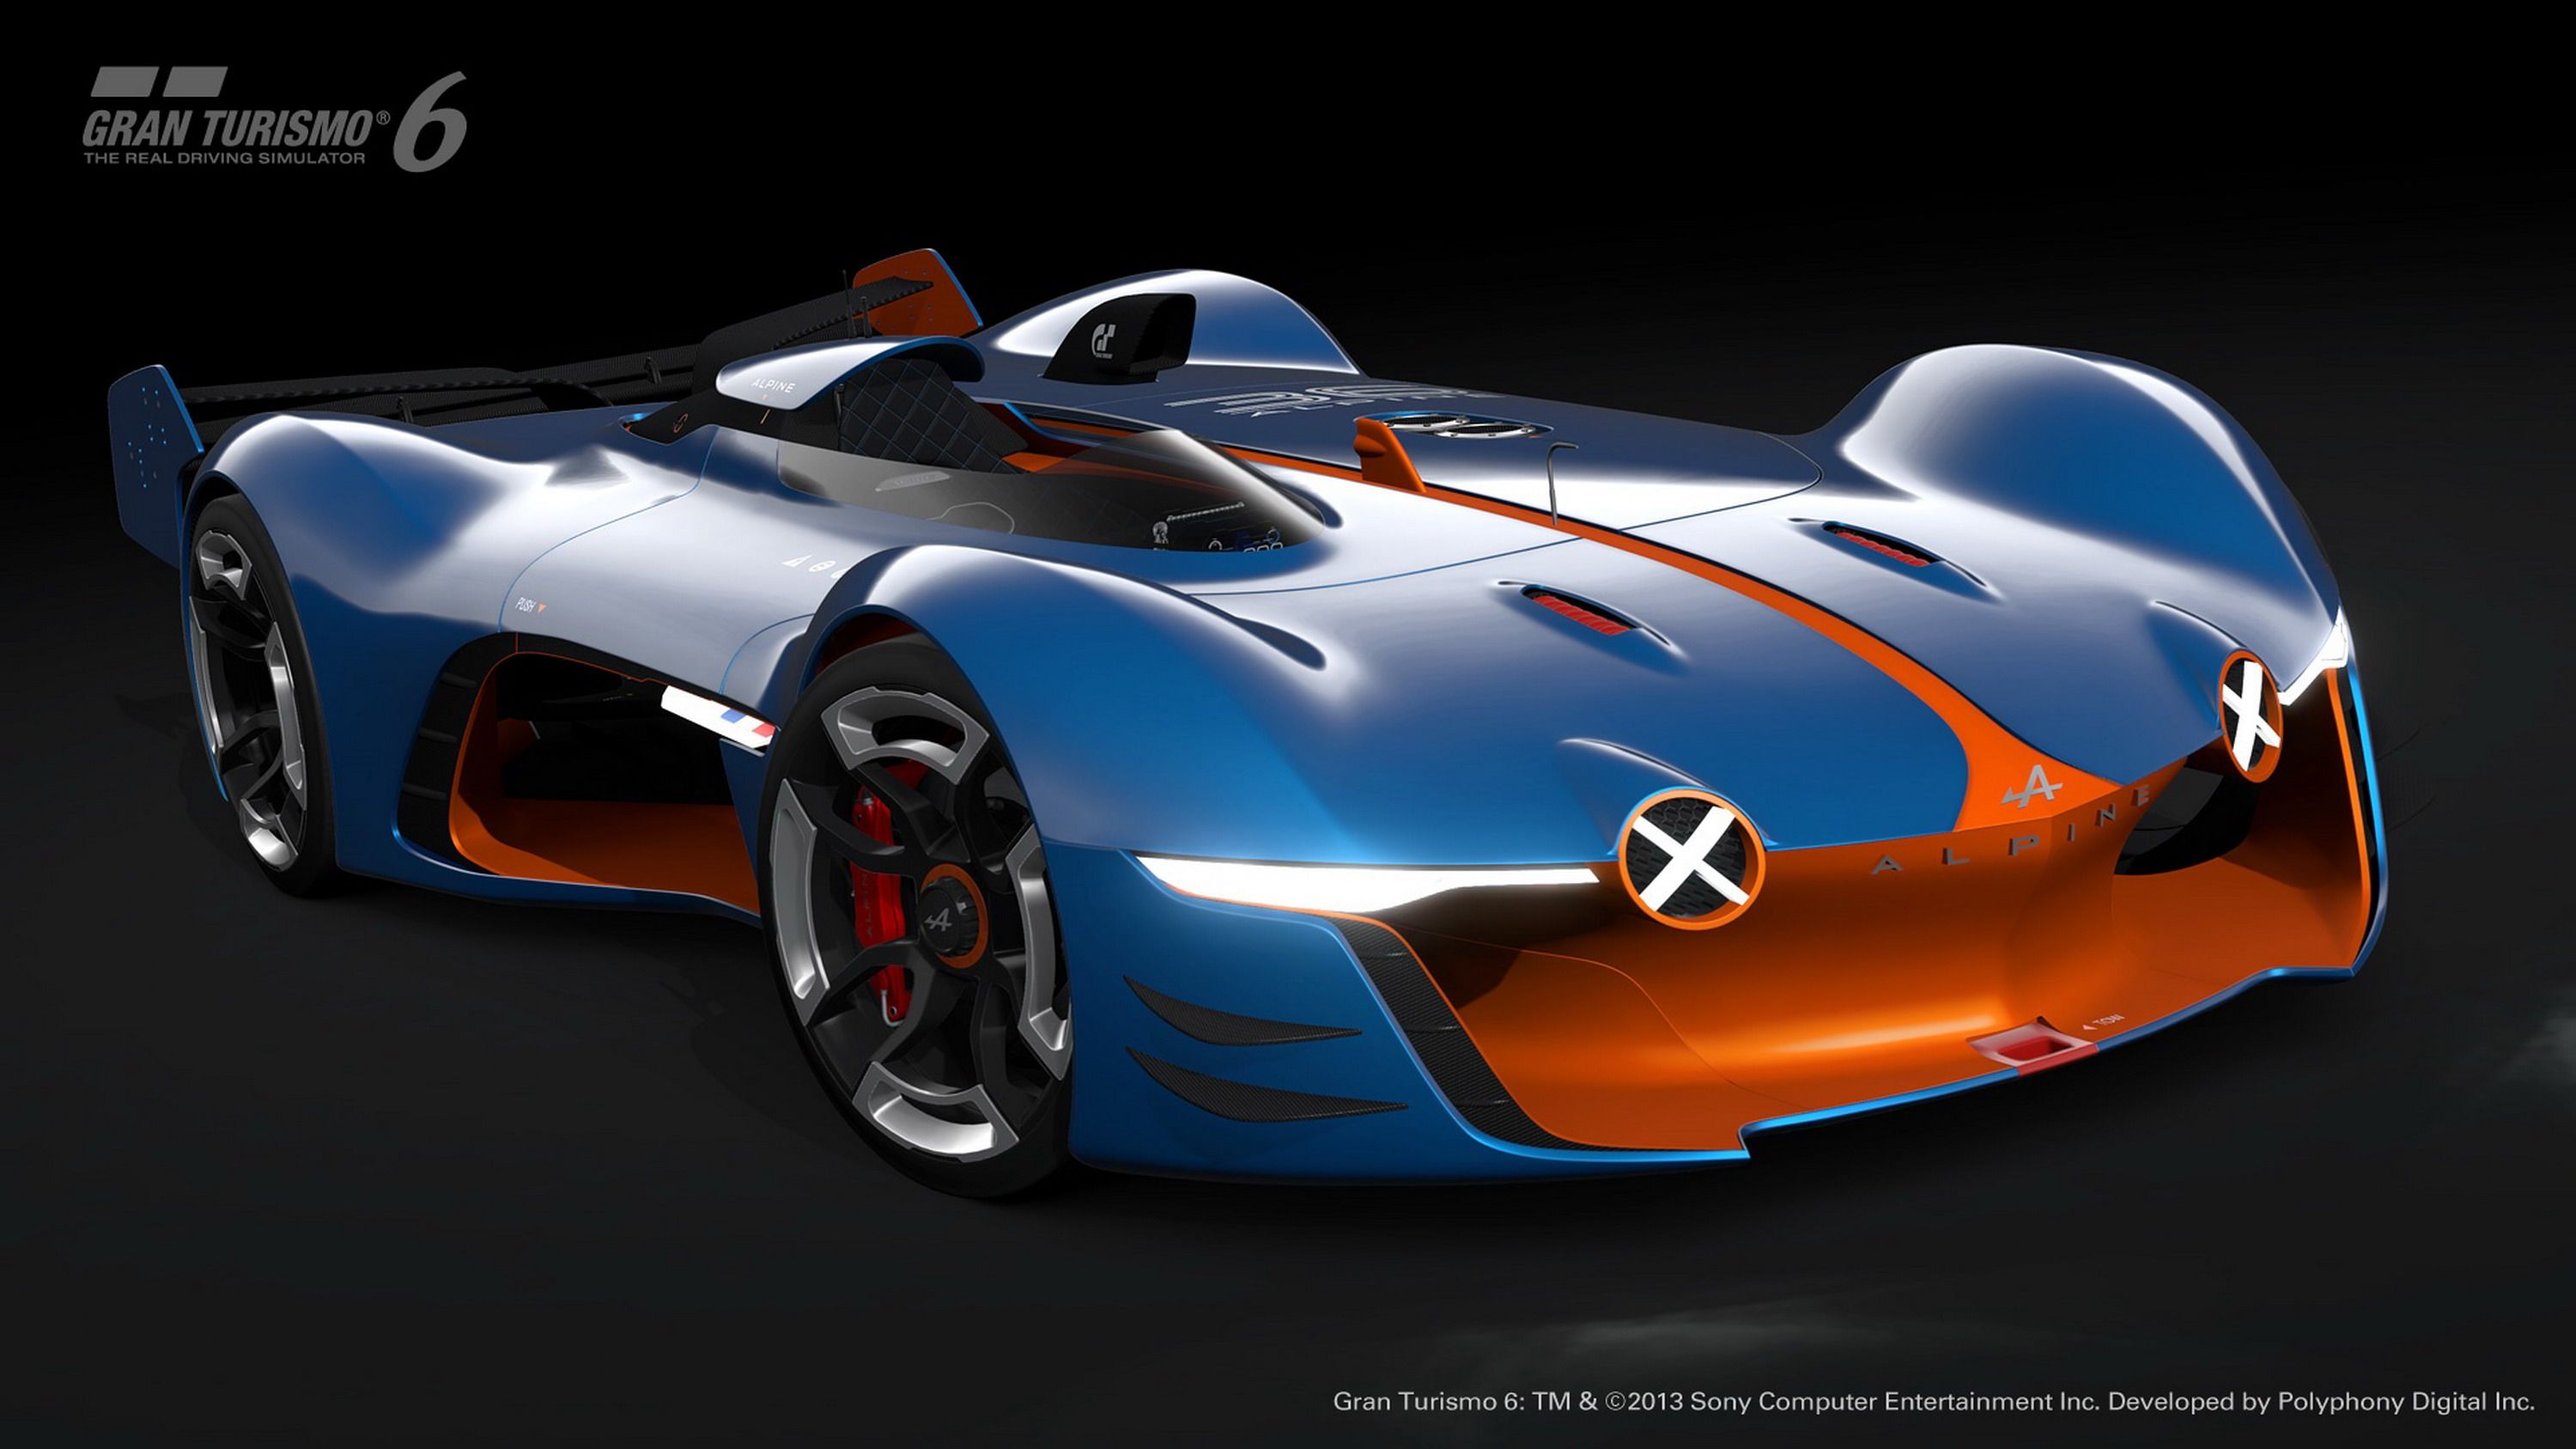 2015 Renault-Alpine Sports Car to Arrive in Dealerships in Early 2017